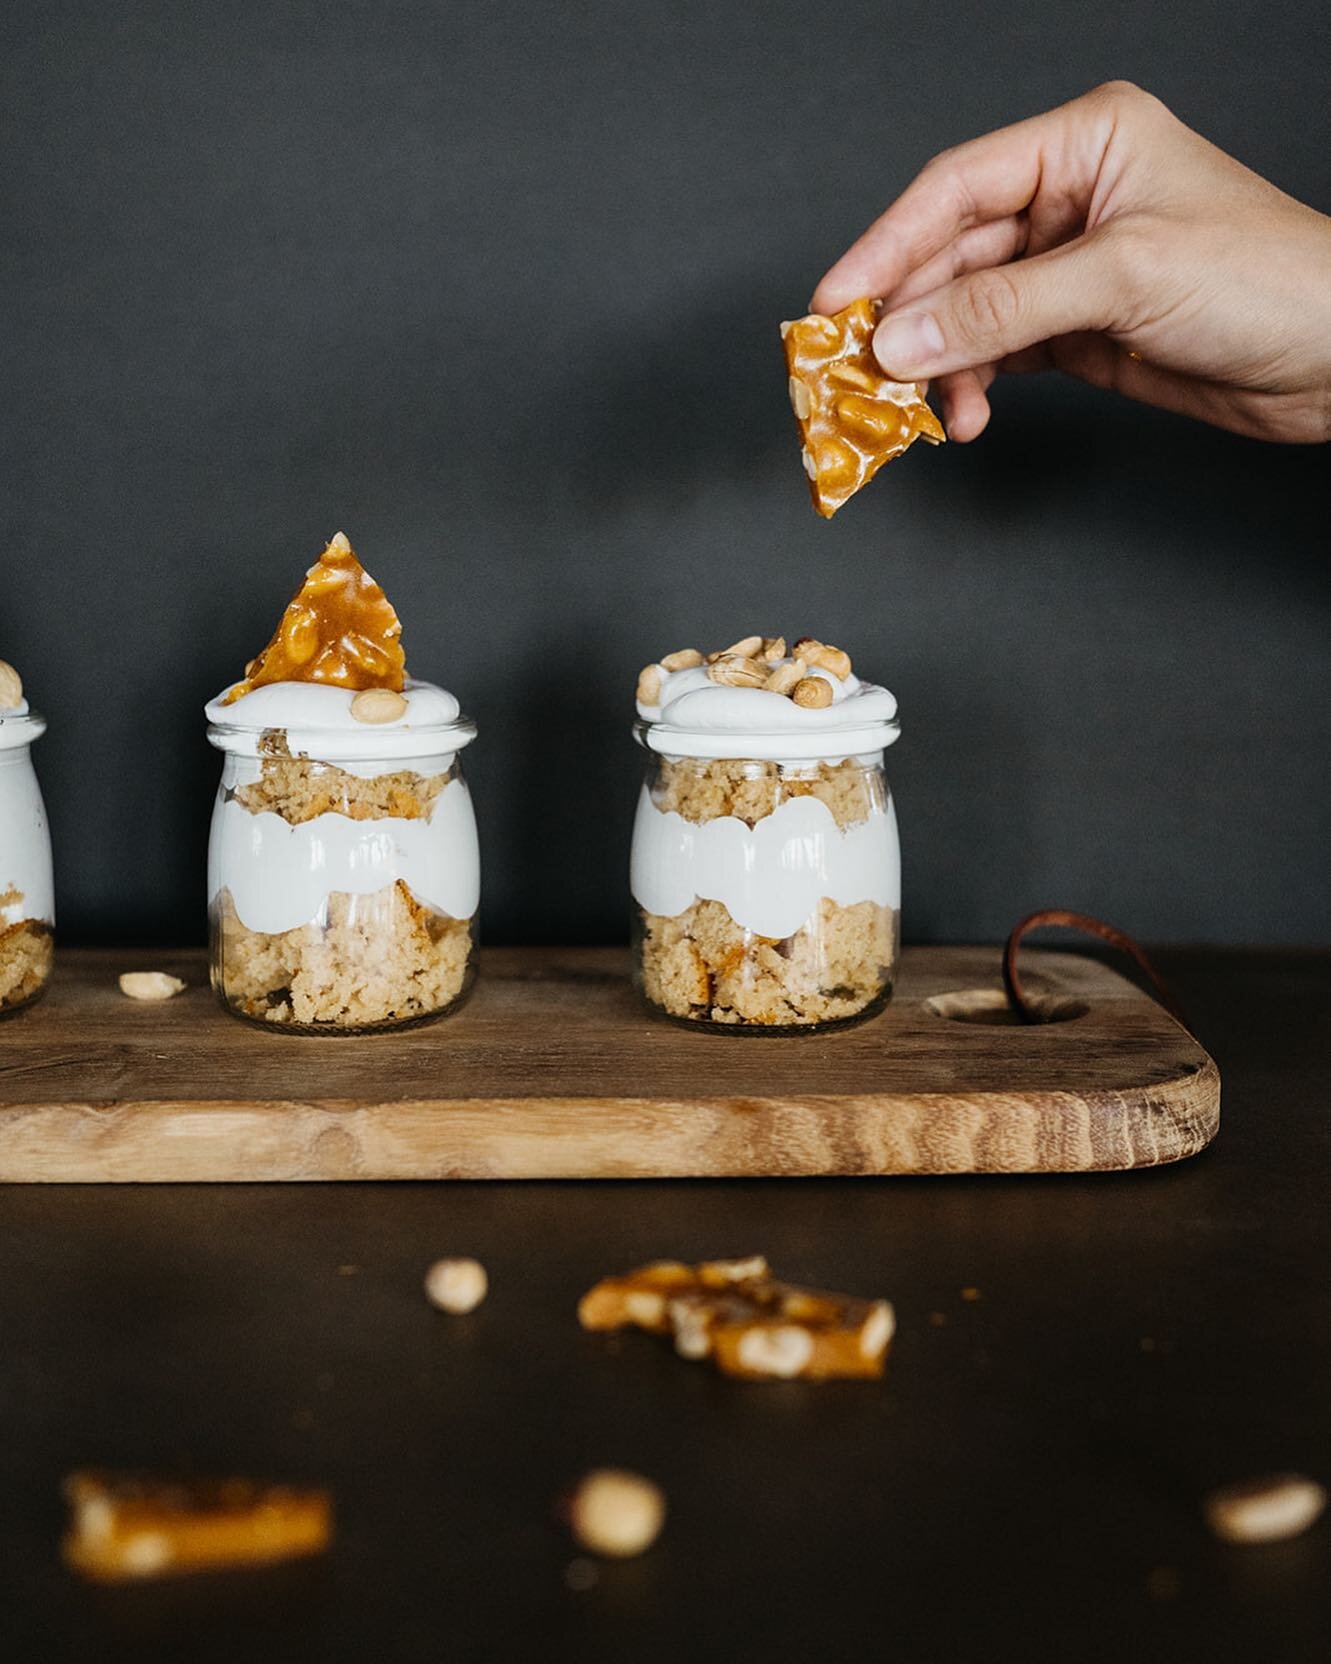 Here&rsquo;s a treat just for your inner child ✨✨ this here is our Fluffernutter Cake Jar. Layers of peanut butter cake topped with vanilla marshmallow fluff, salted peanuts, and peanut brittle crunchies! 
Back in the day, you&rsquo;d never catch us 